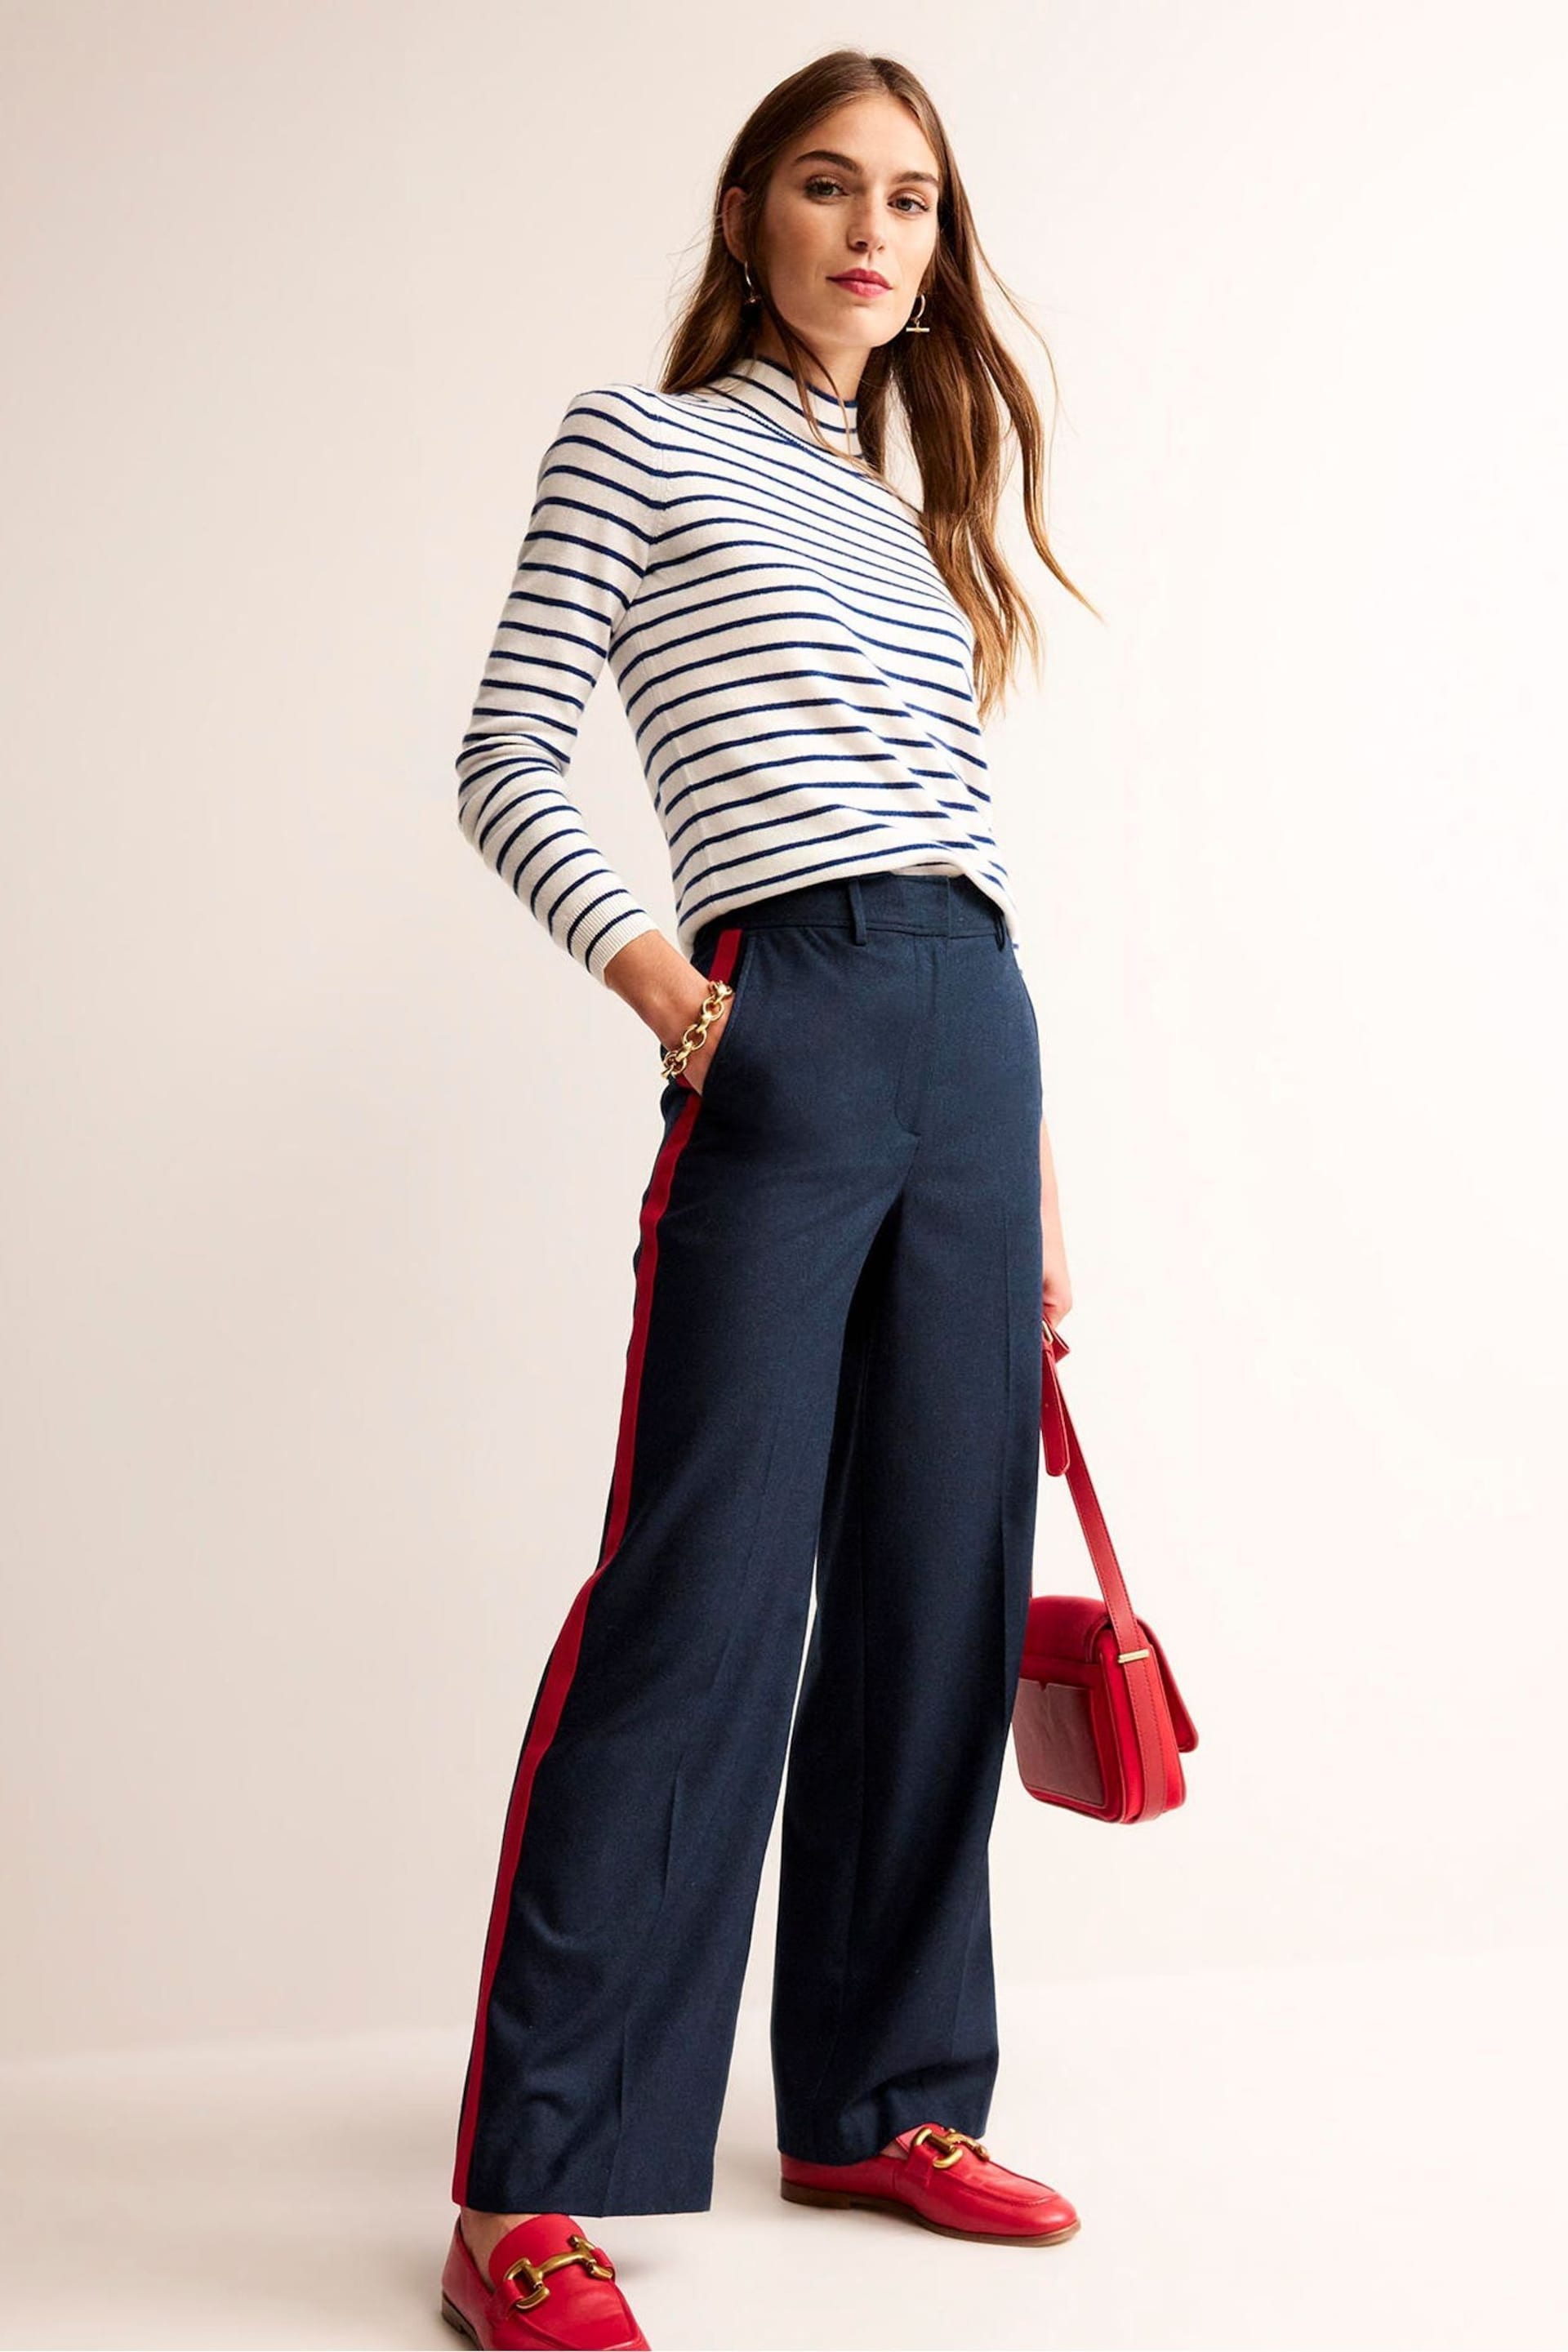 Boden Blue Westbourne Wool Trousers - Image 3 of 5